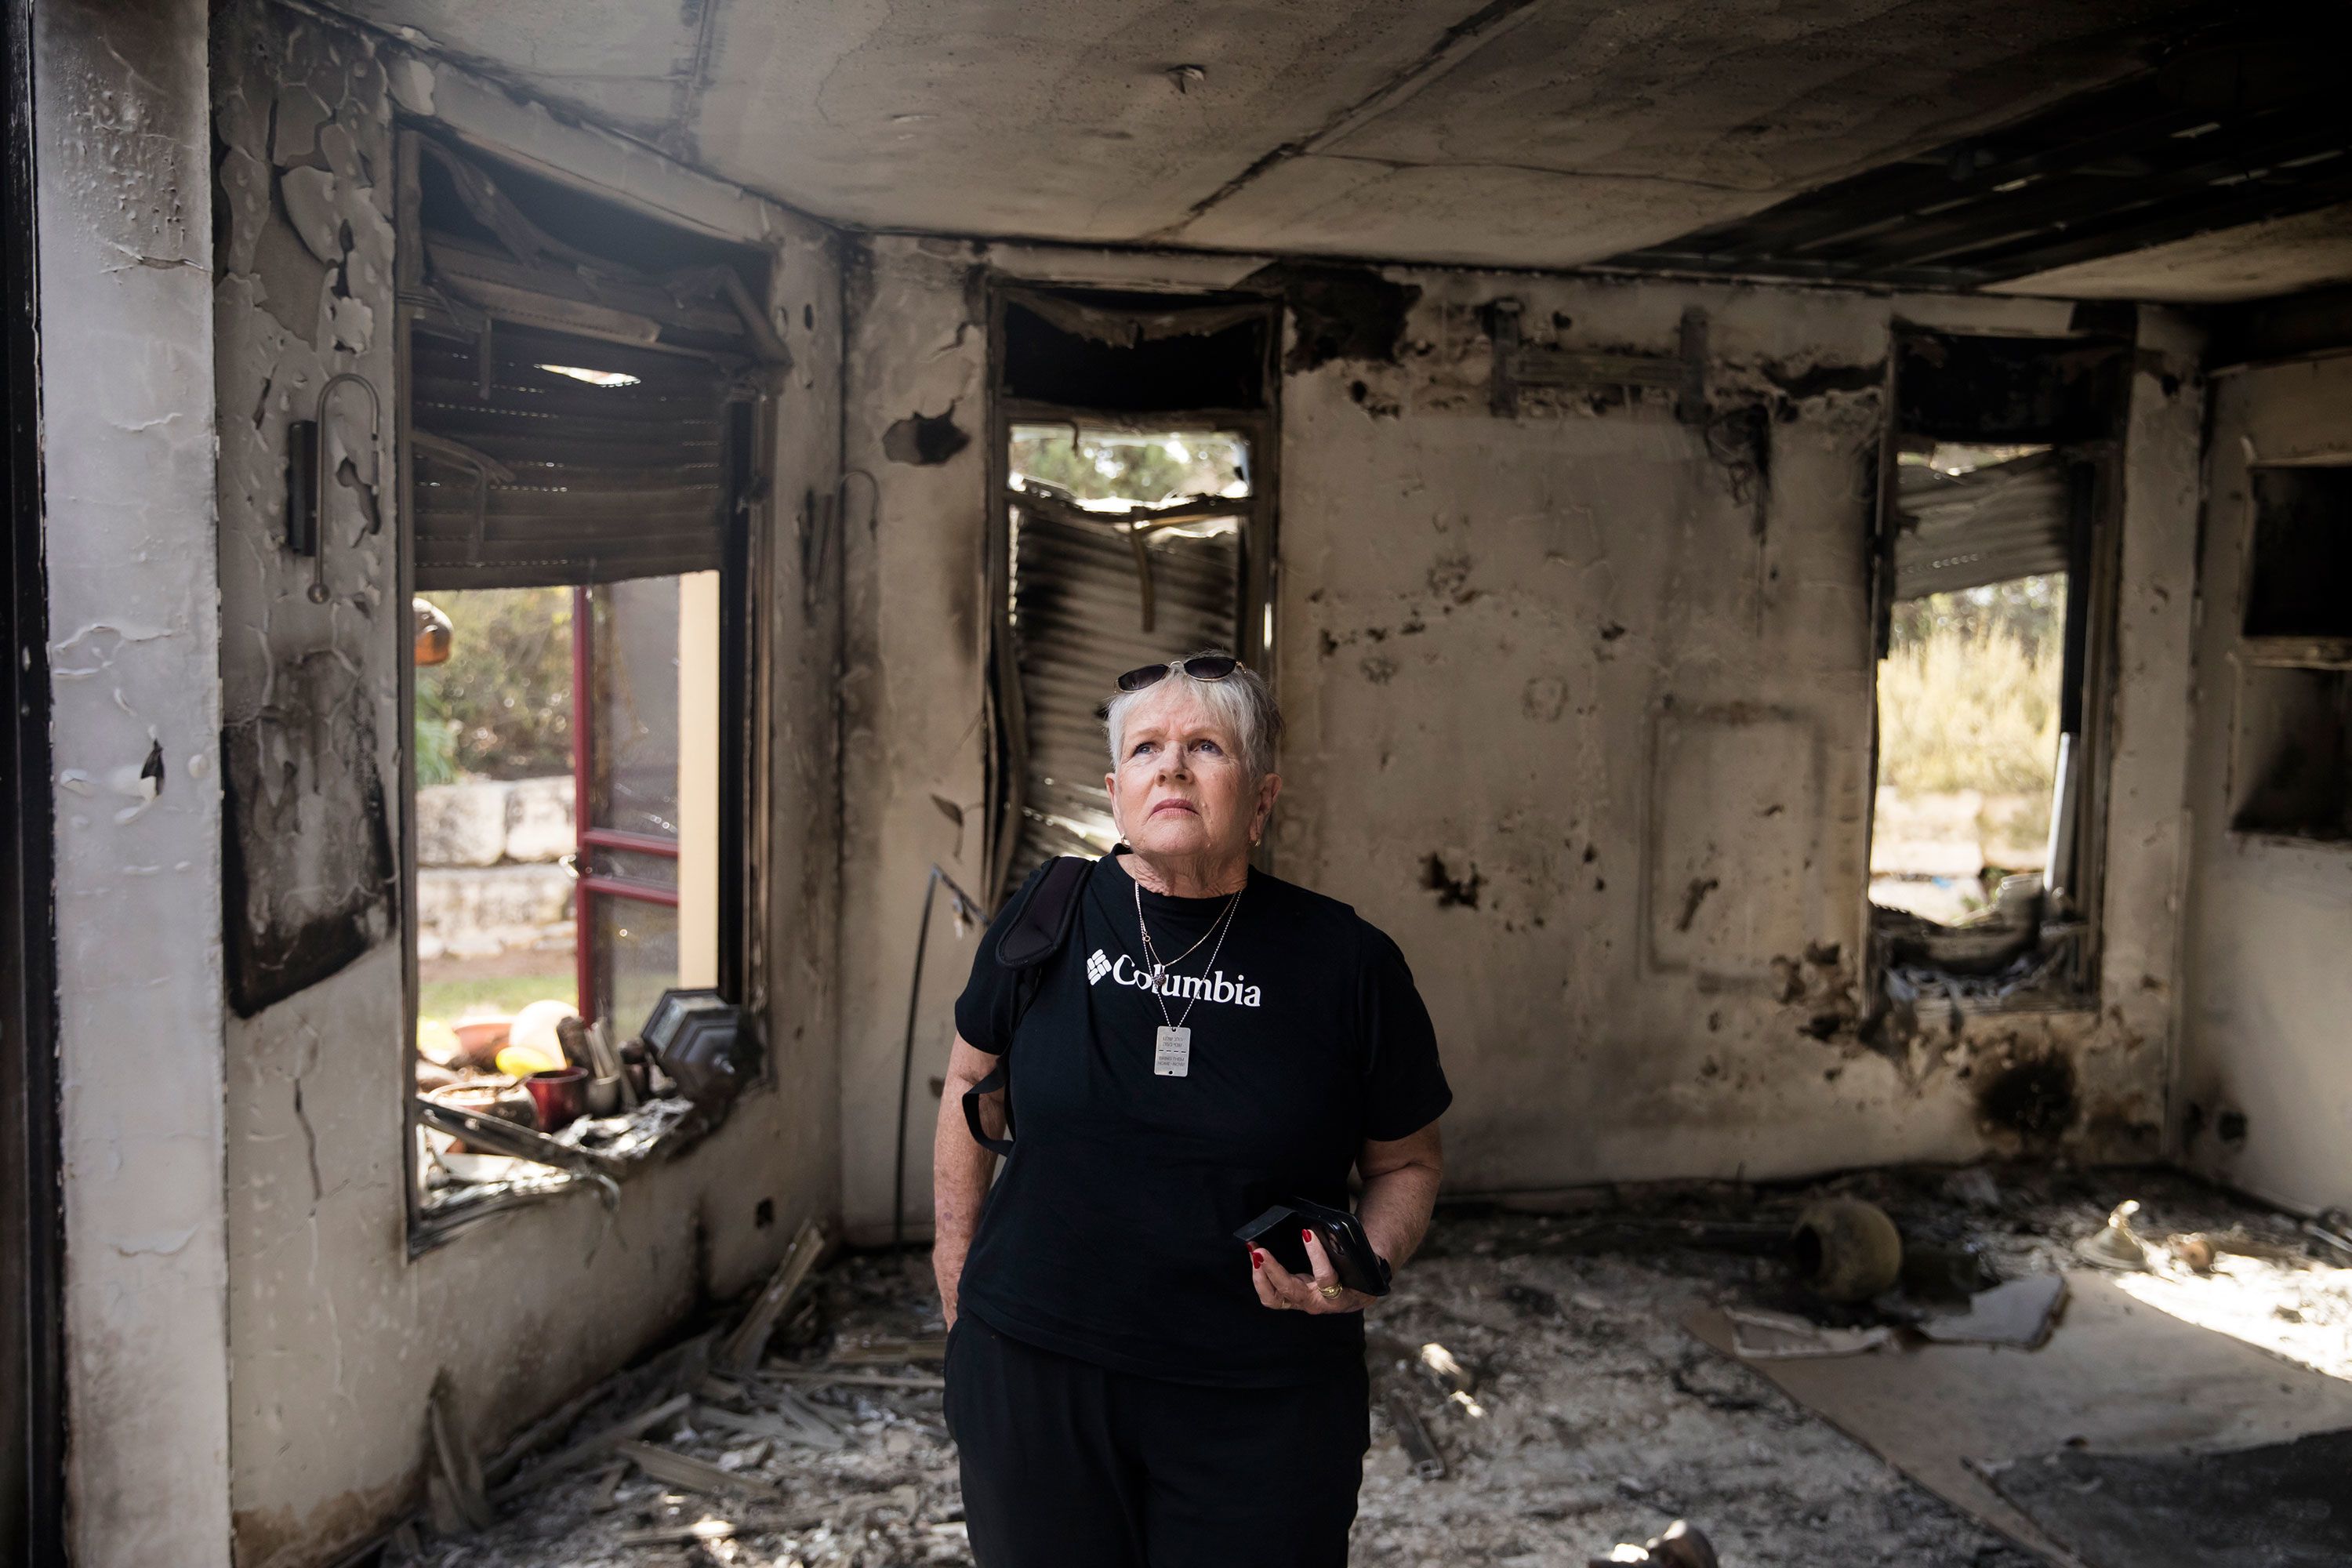 Varda Goldstein enters her house for the first time after it was burned in the October 7 Hamas attack in Kfar Aza, Israel, on November 10.